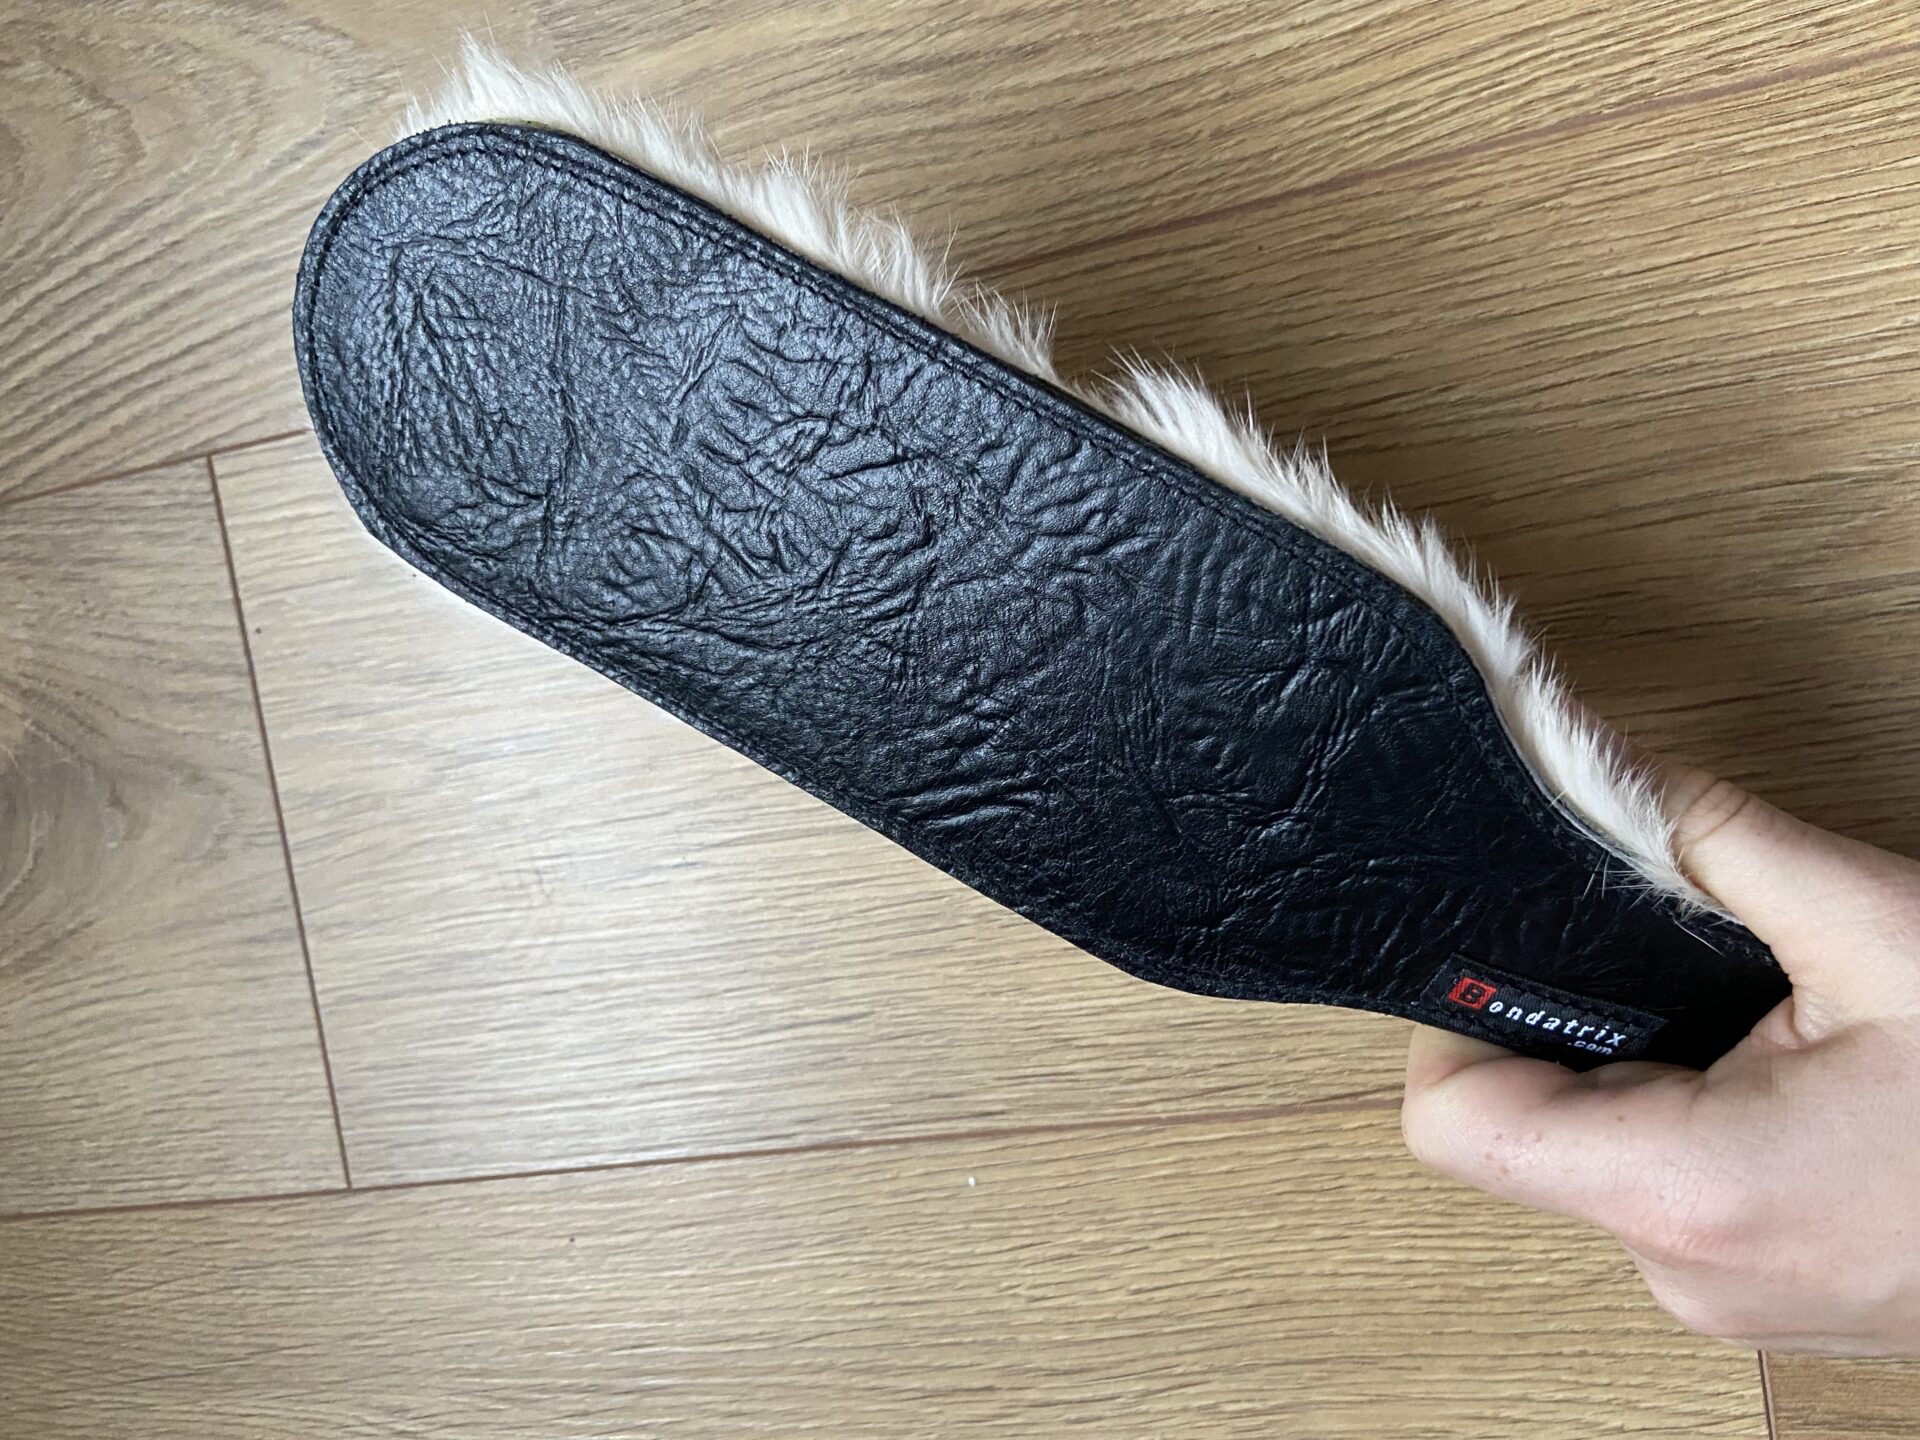 Black leather and fur paddle